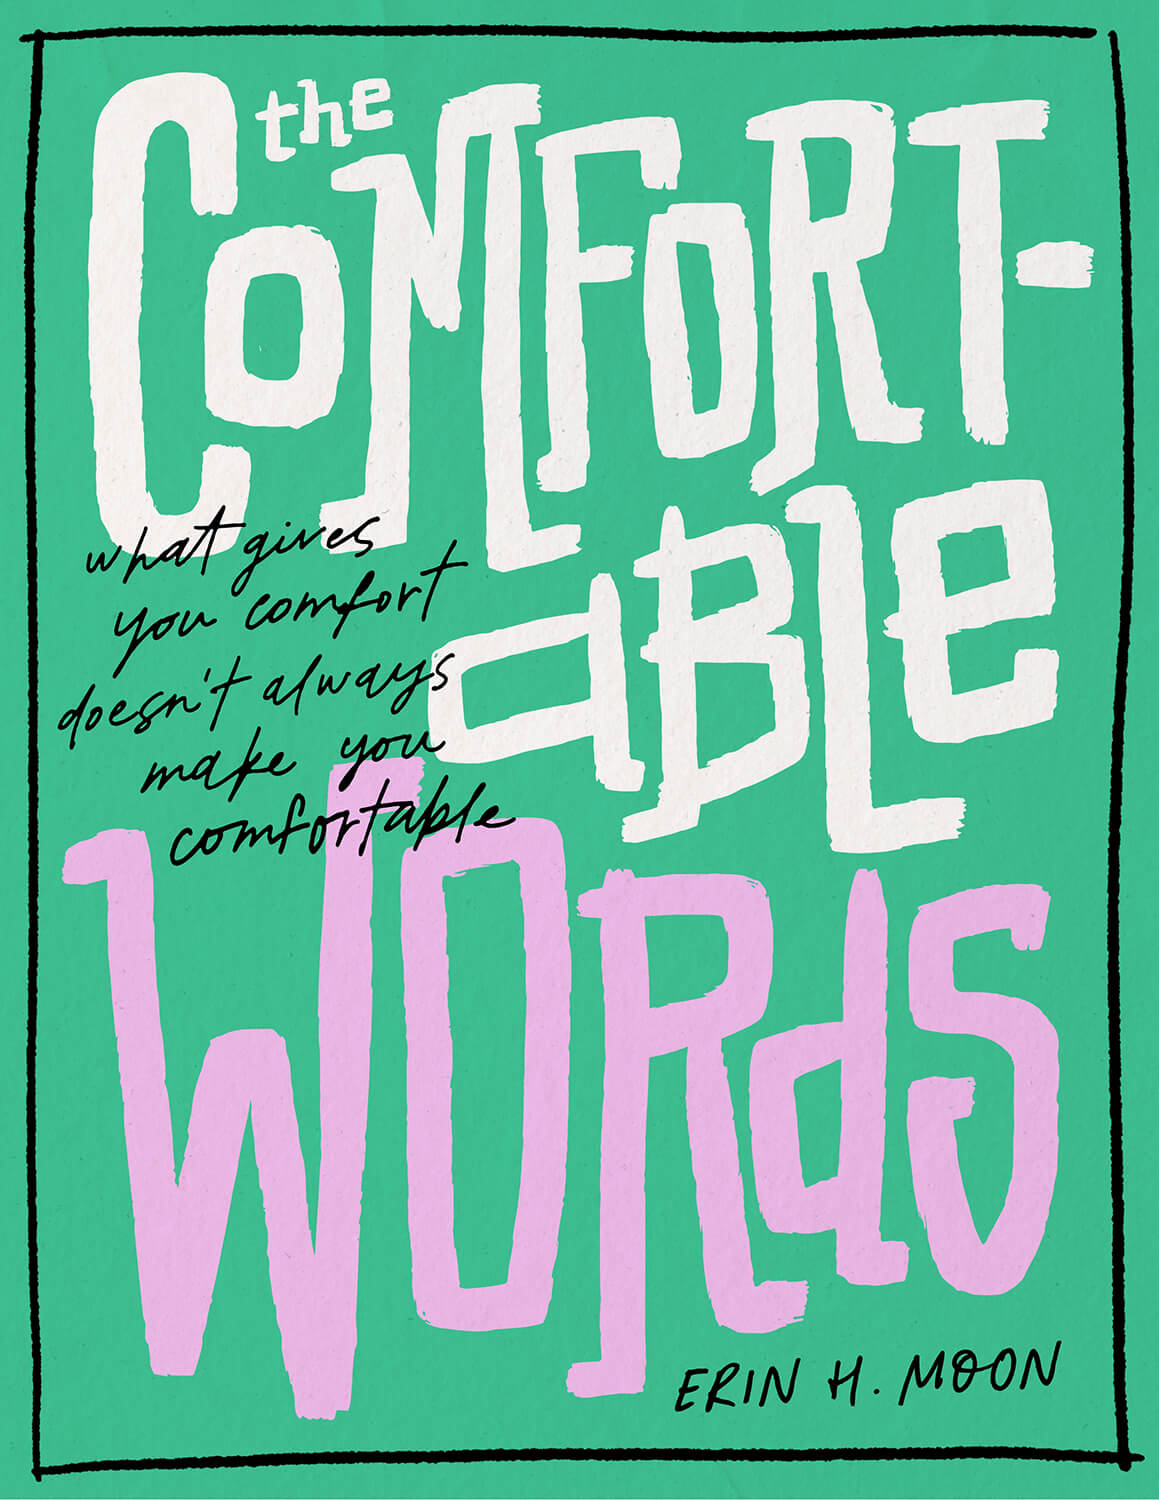 The Comfortable Words: A 10-Day Digital Devotional